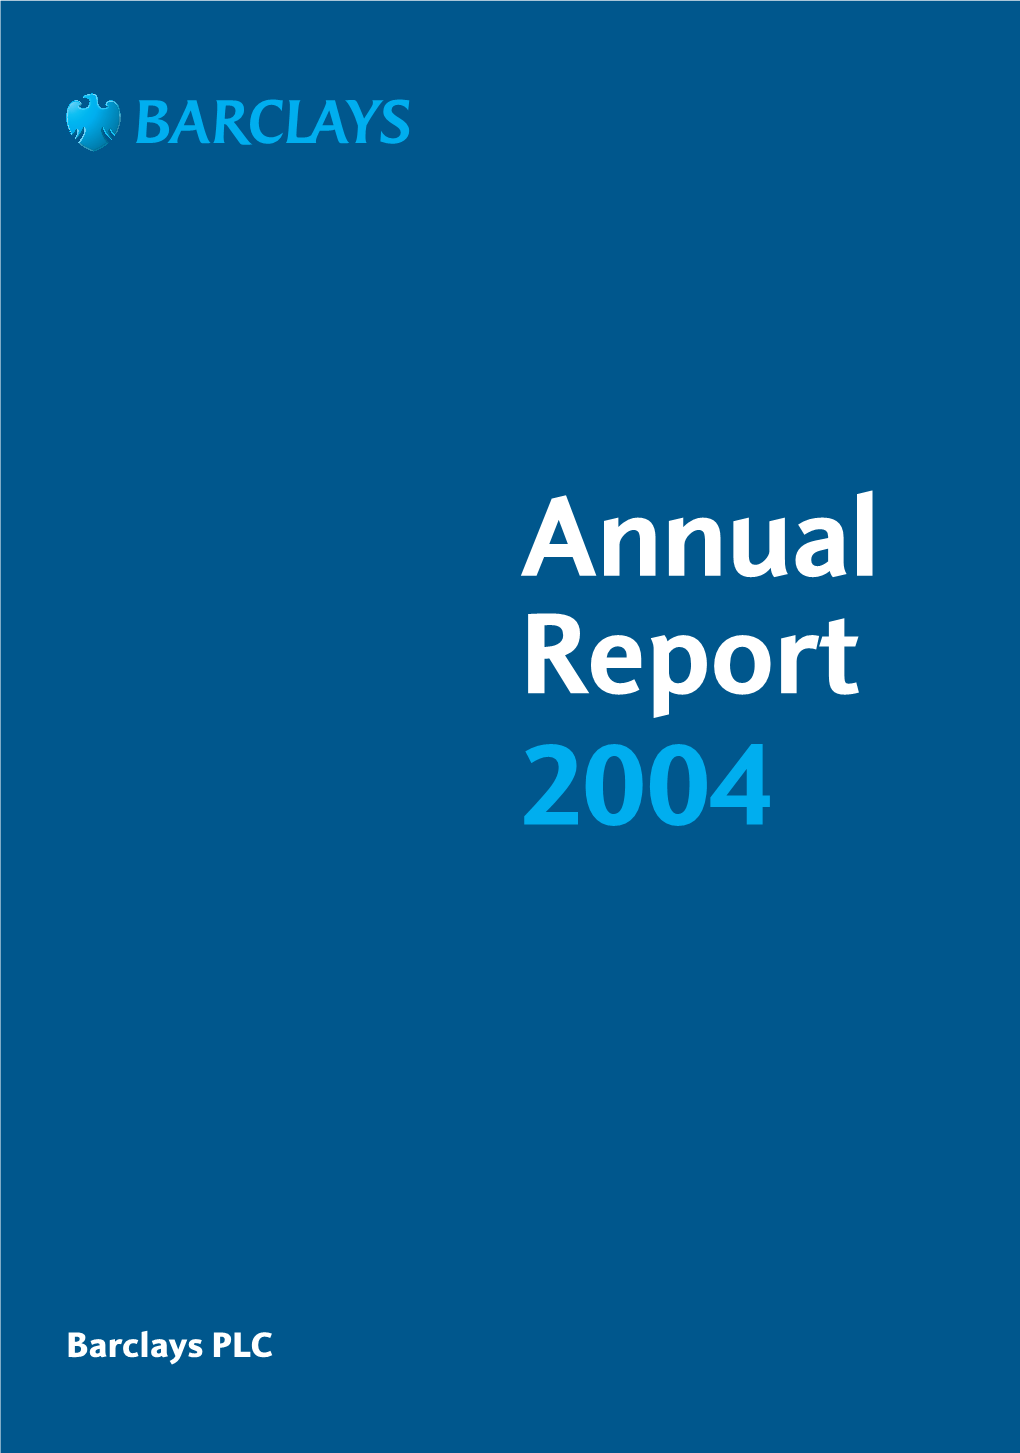 Barclays PLC Annual Report 2004